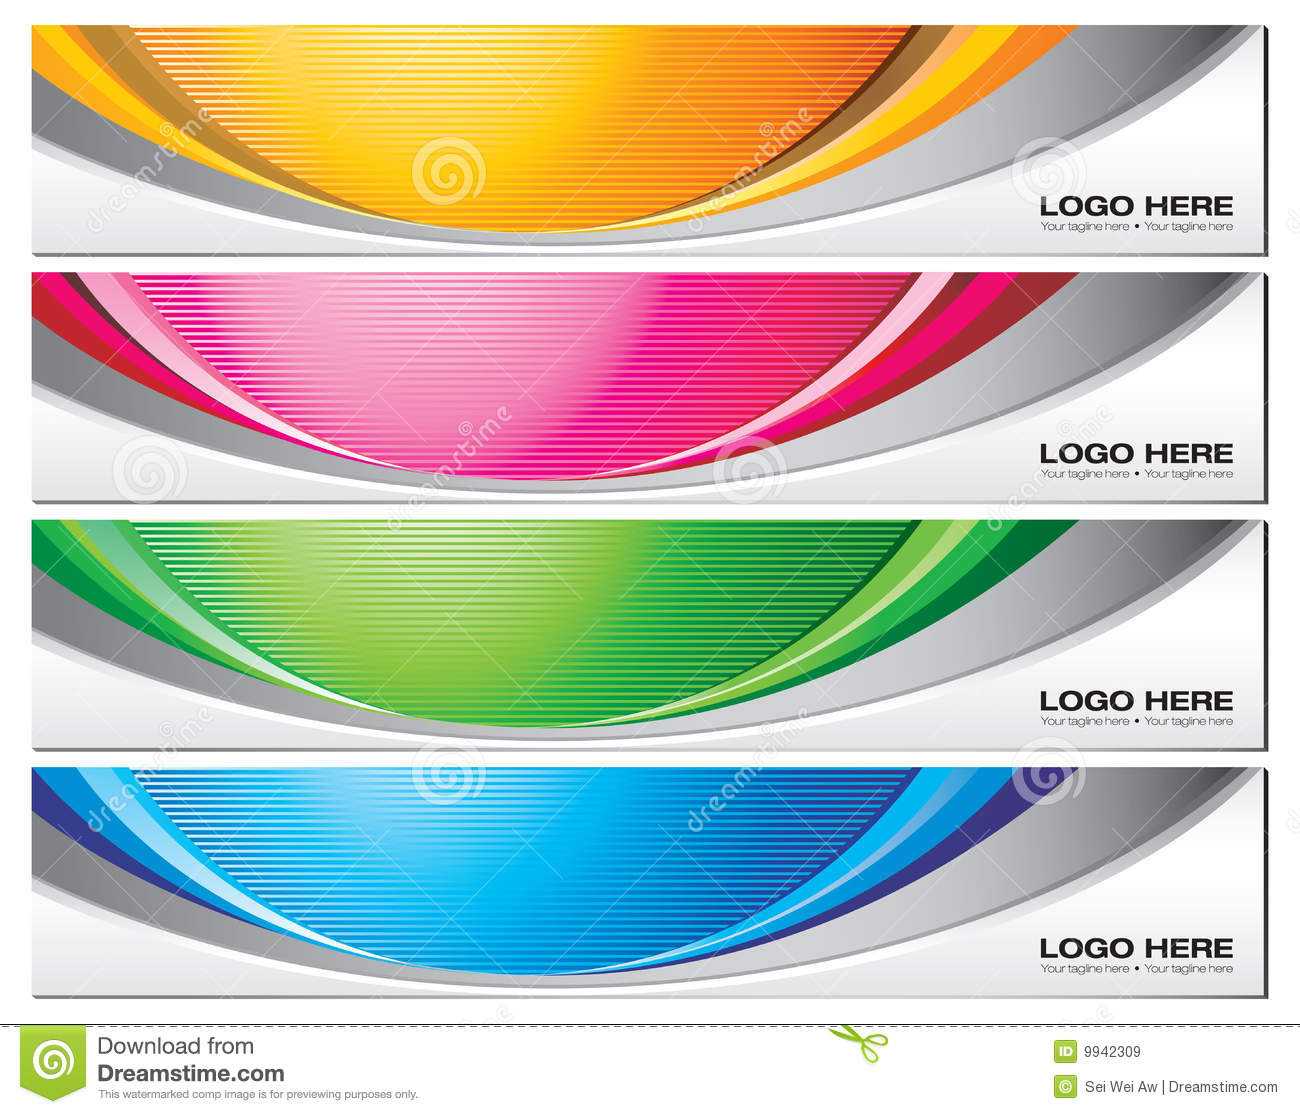 Banner Templates Stock Vector. Illustration Of Vector – 9942309 With Free Website Banner Templates Download